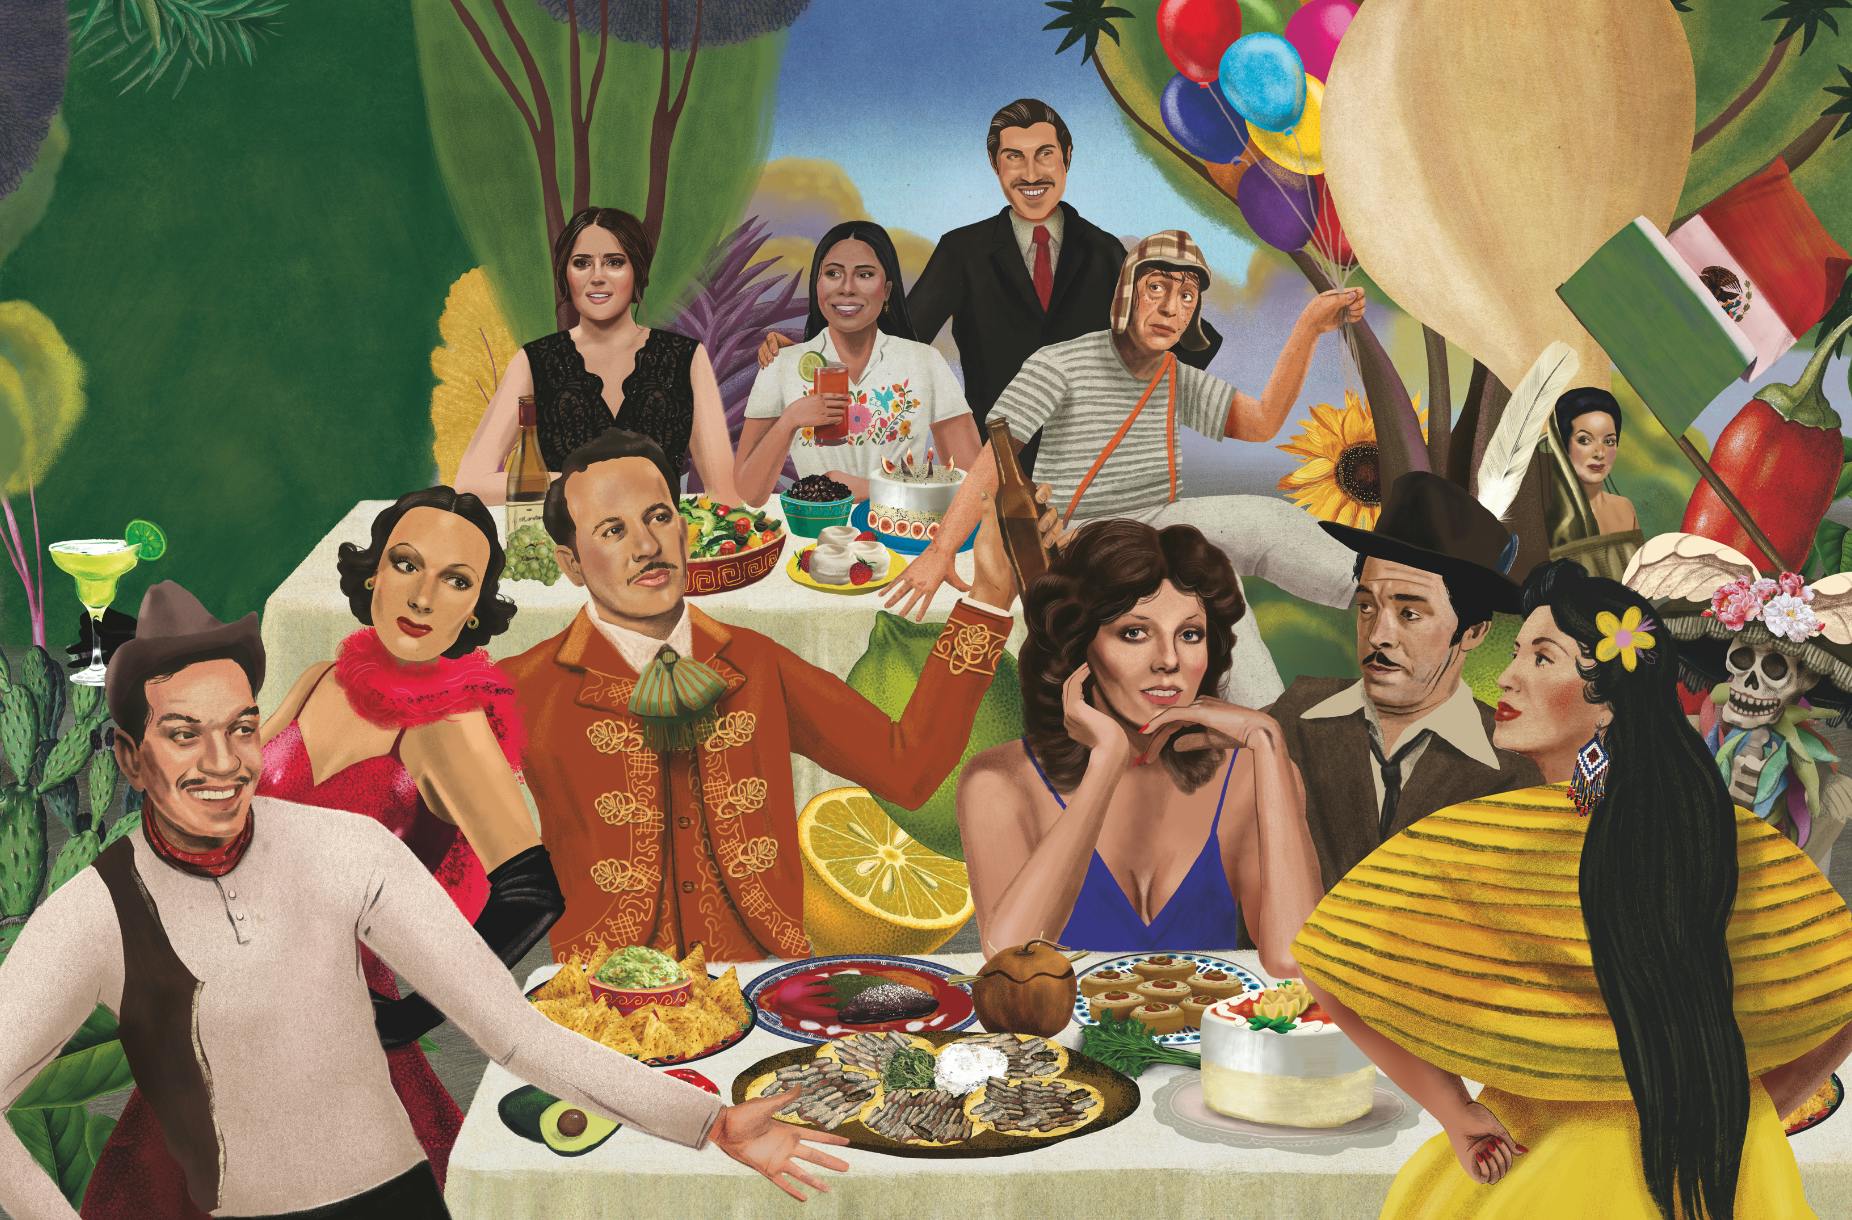 A crew of Mexican cinema and tv legends sit around colorful tables brimming with food.